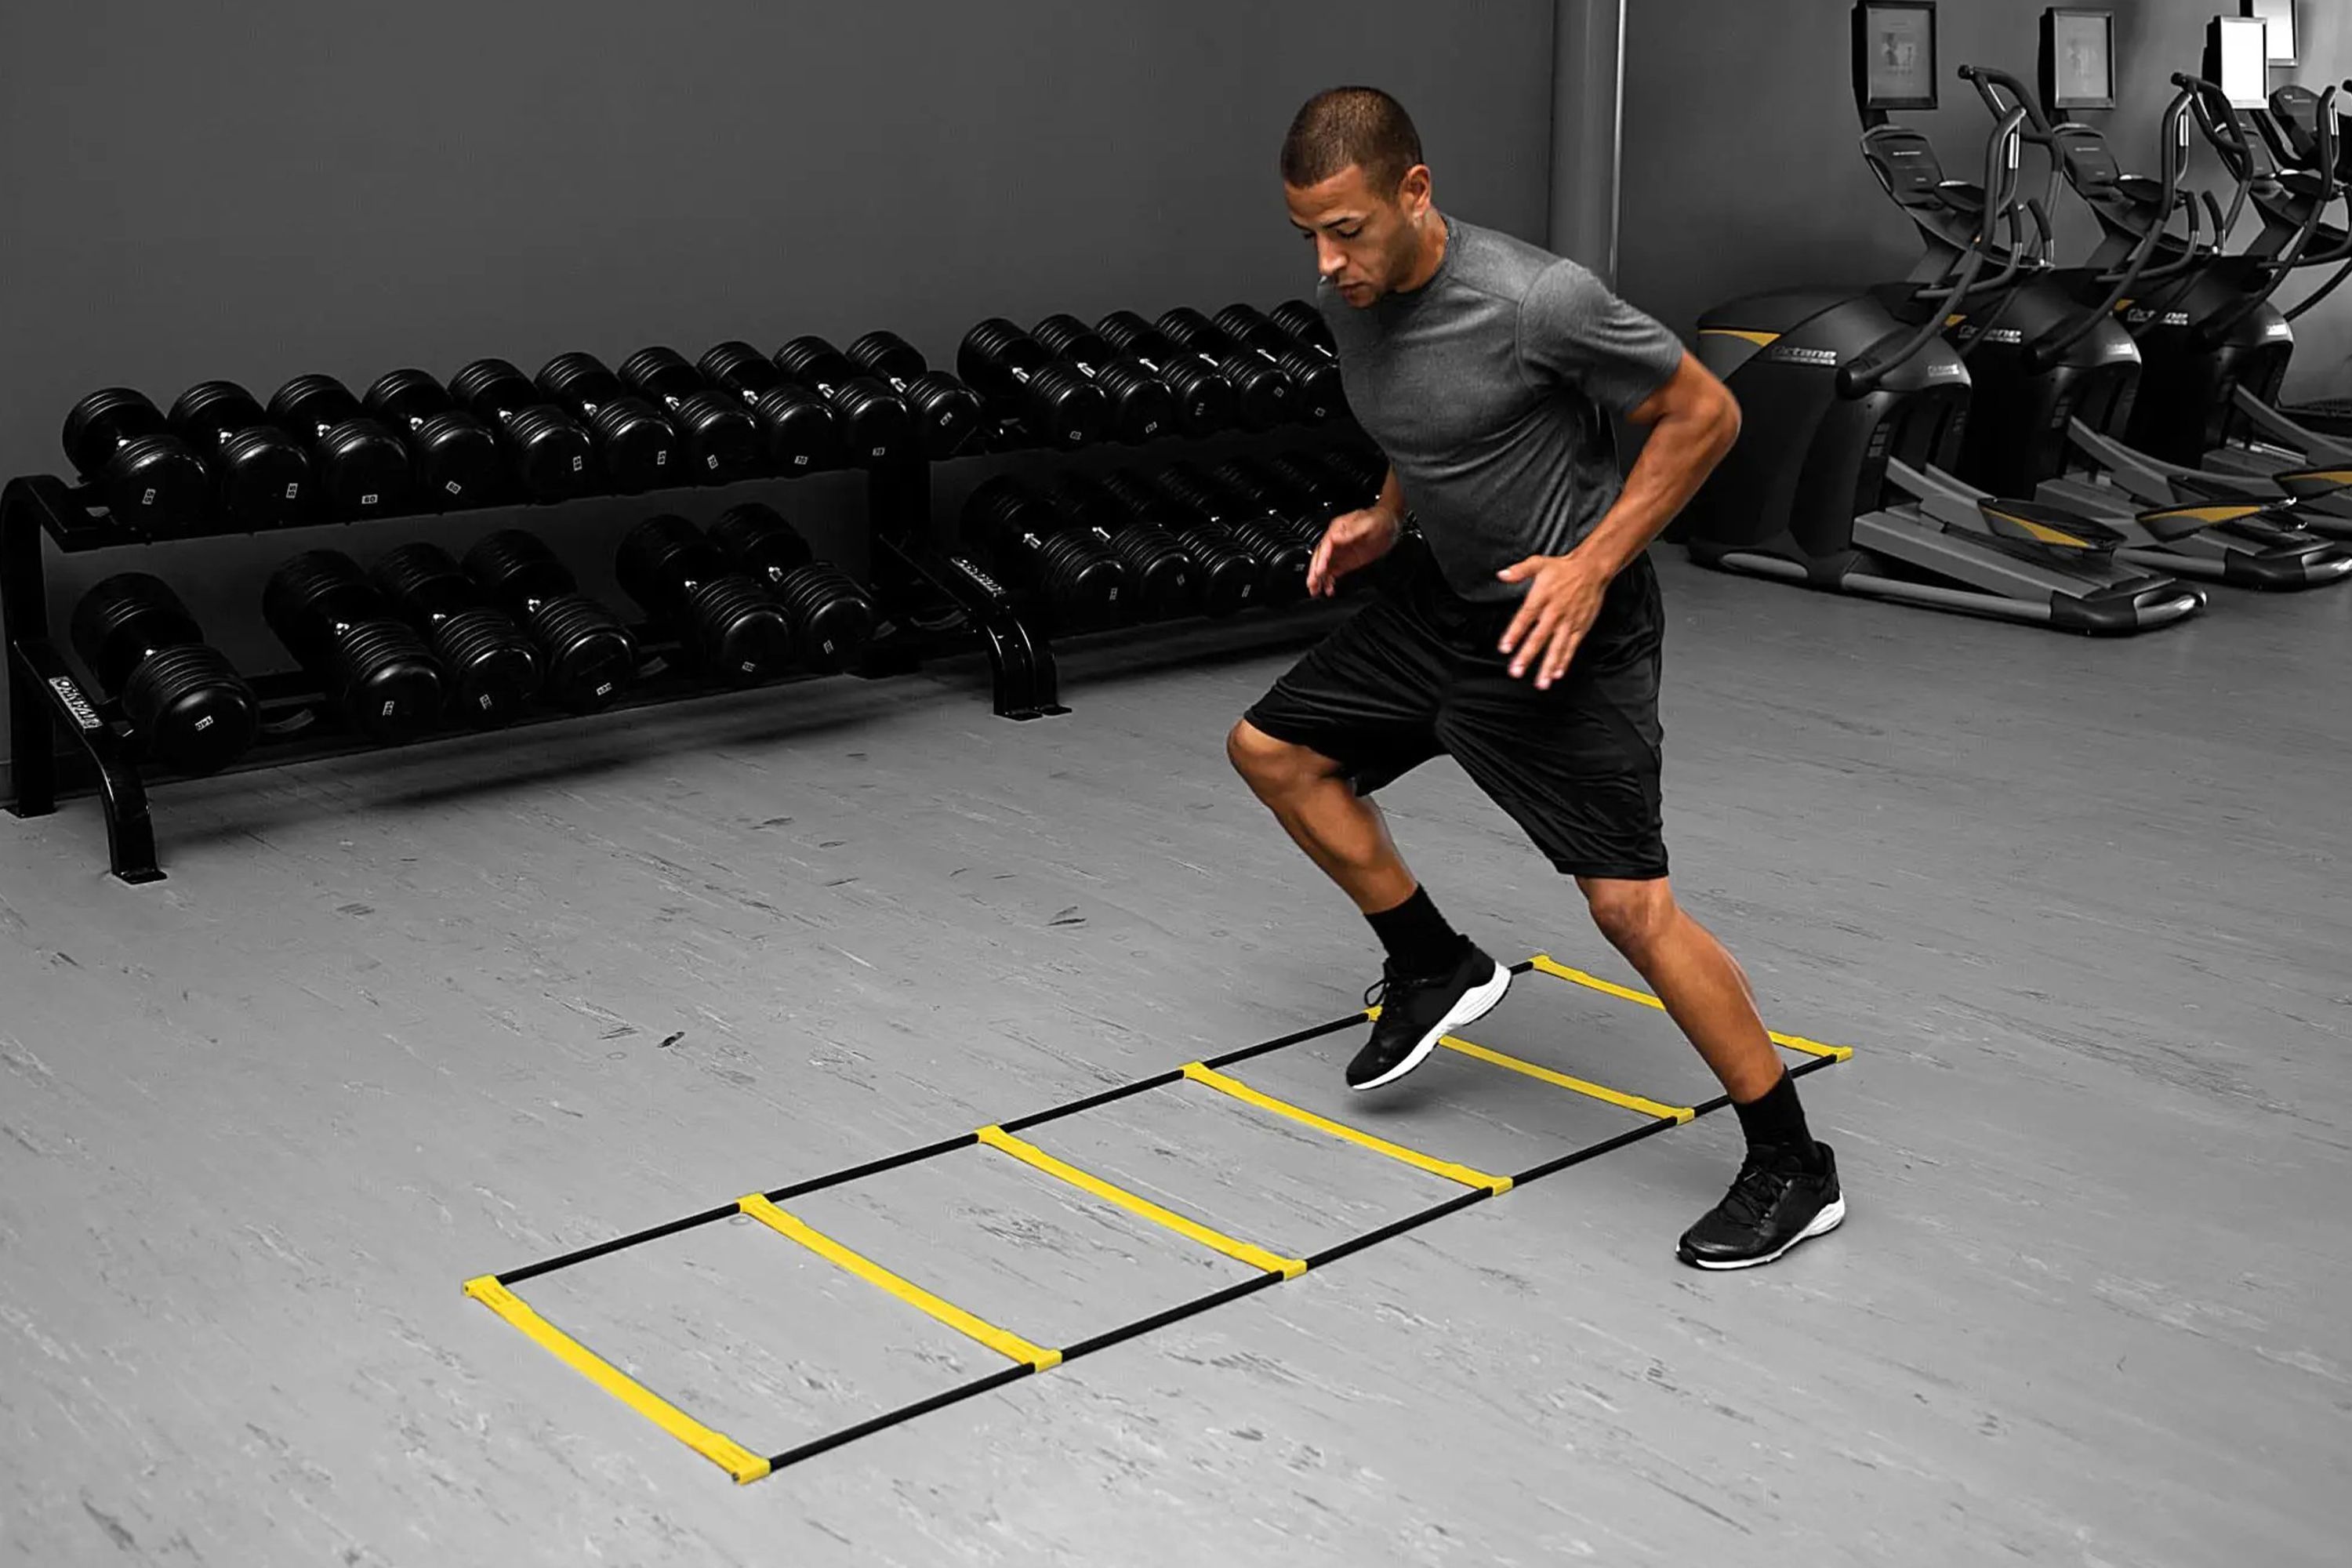 Climb the Fitness Ranks With the Best Agility Ladders